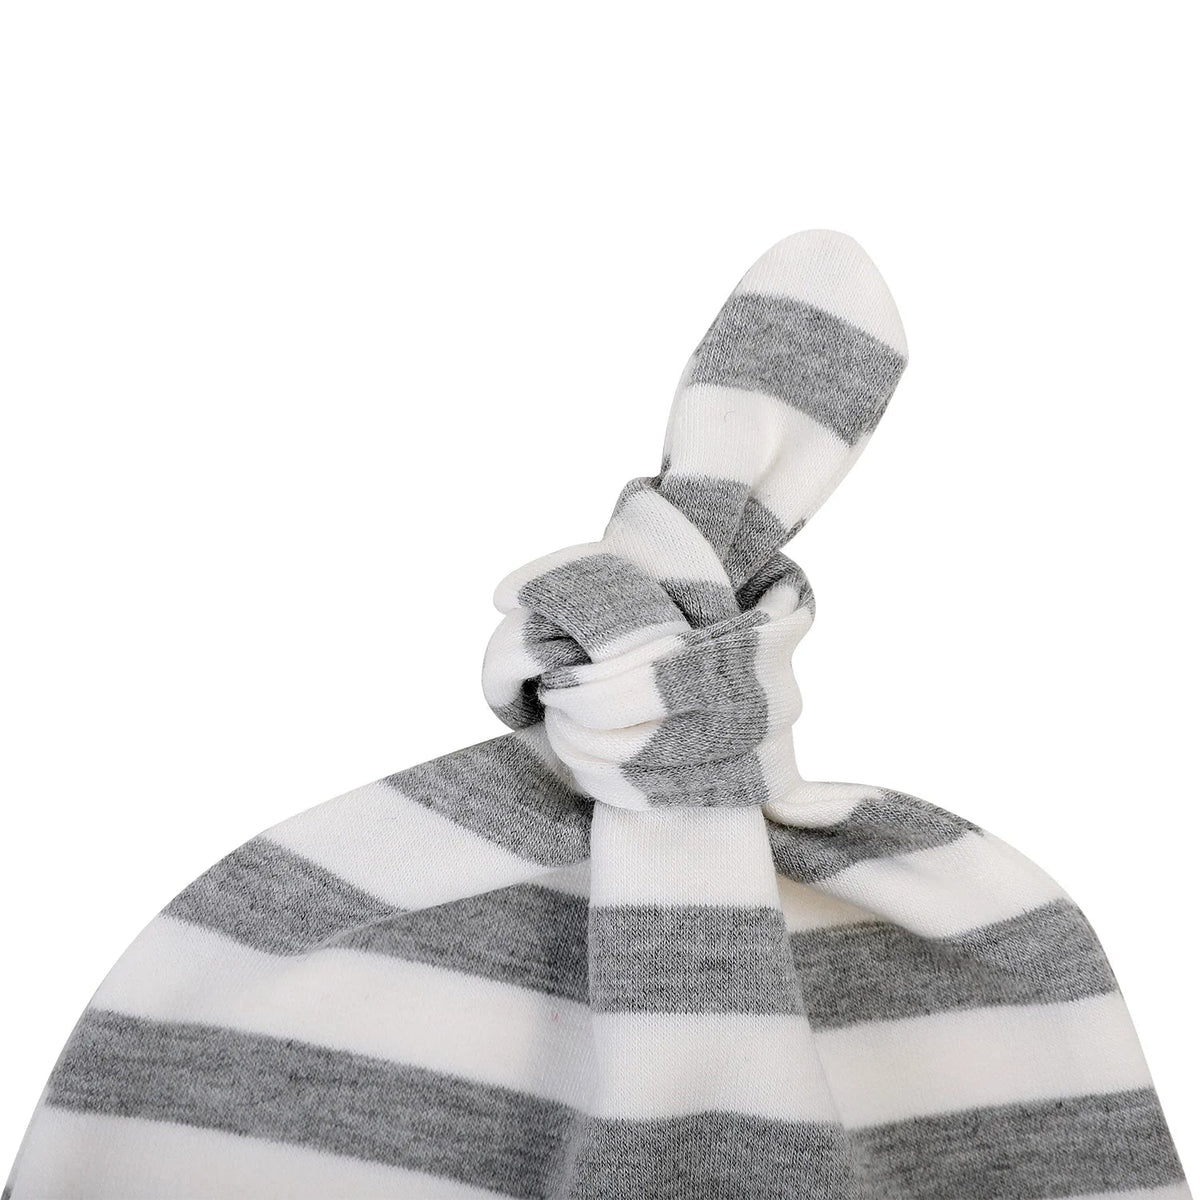 Blue Skies Knot Beanie Organic Cotton Baby Hat | Hypoallergenic - Allergy Friendly - Naturally Free